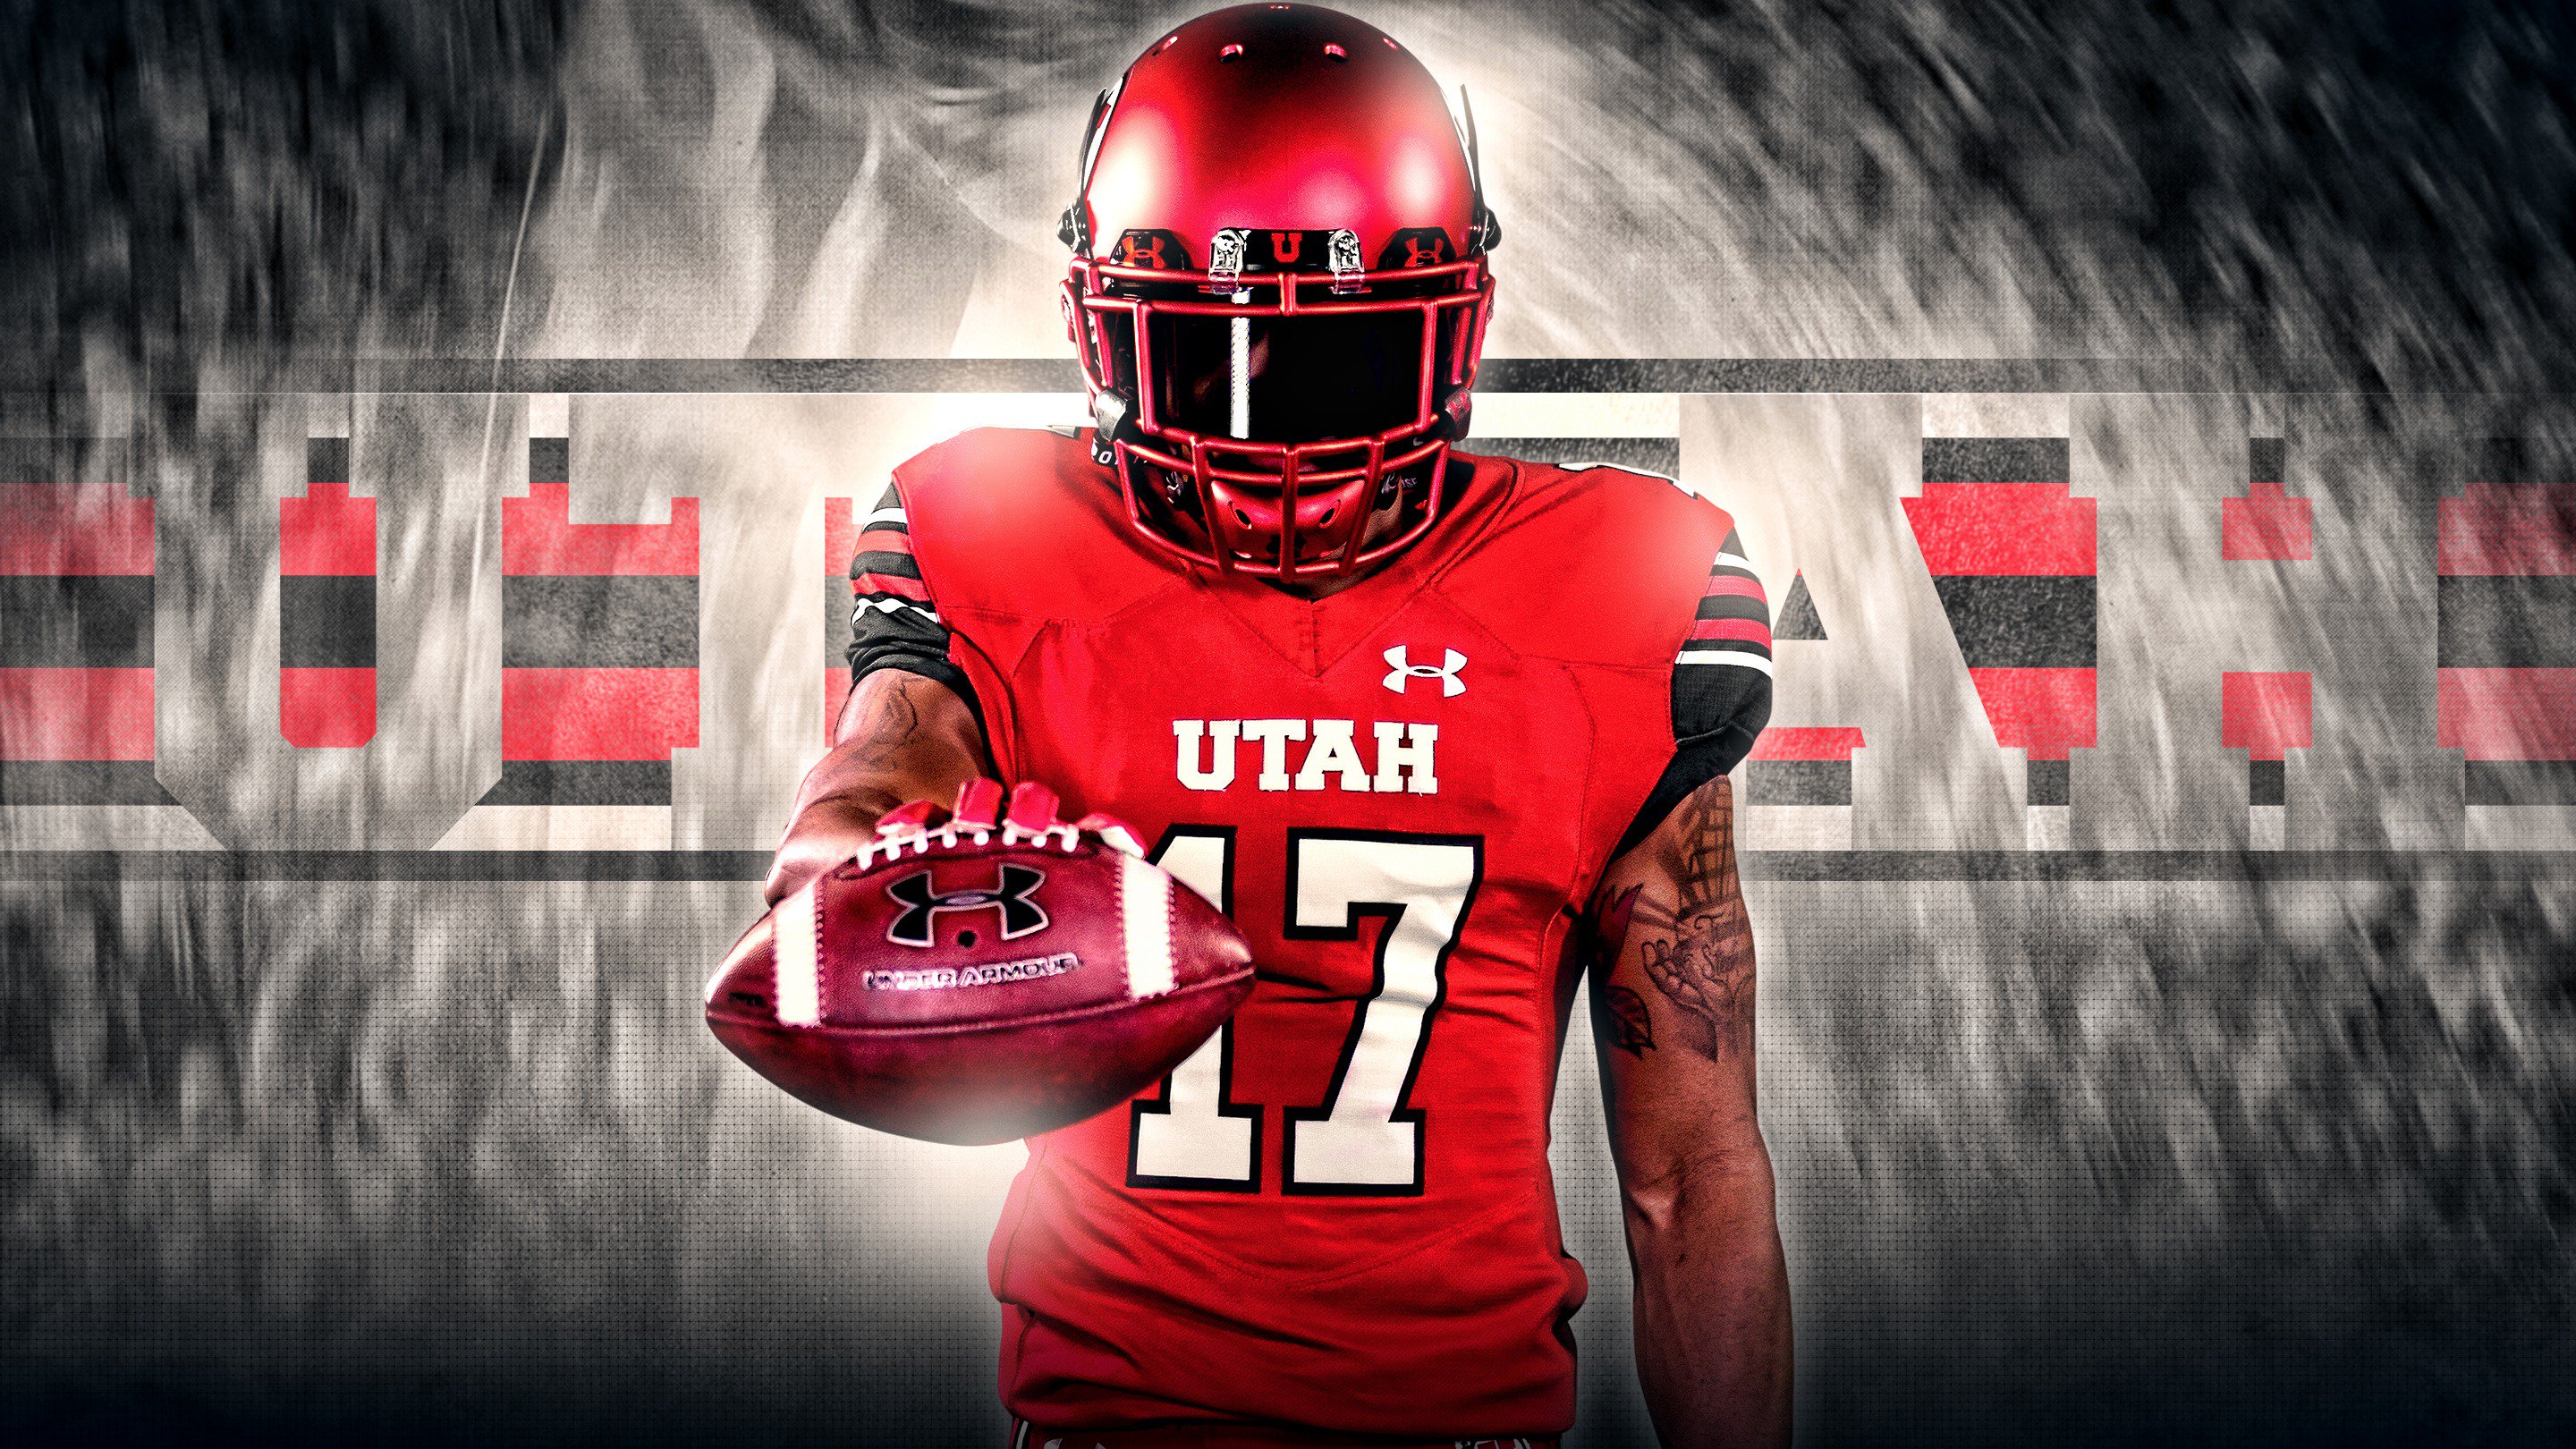 Utah Football your phone and desktop wallpaper to feature the new uniforms